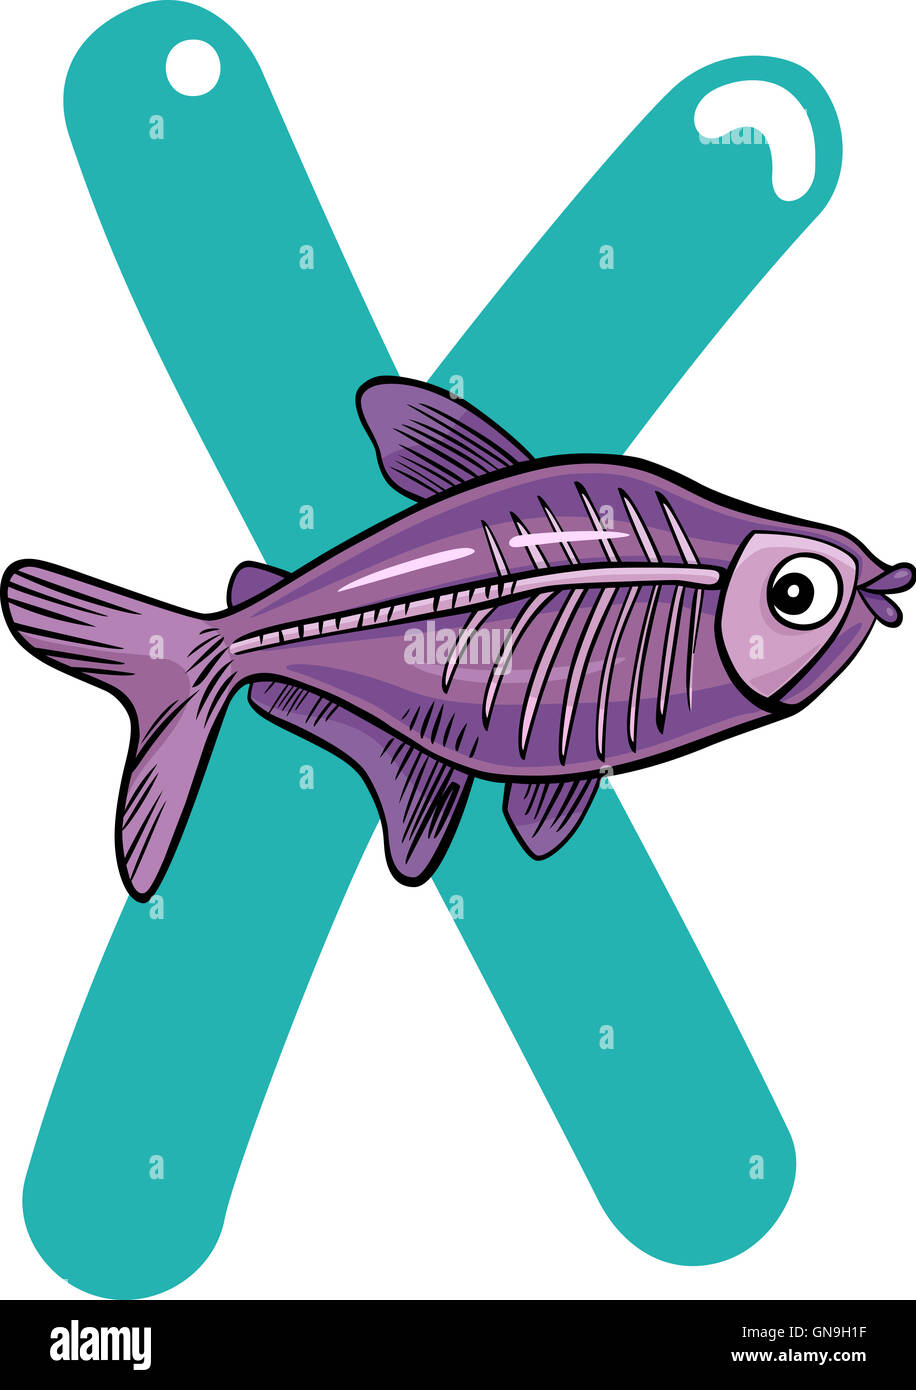 X for x-ray fish Stock Photo